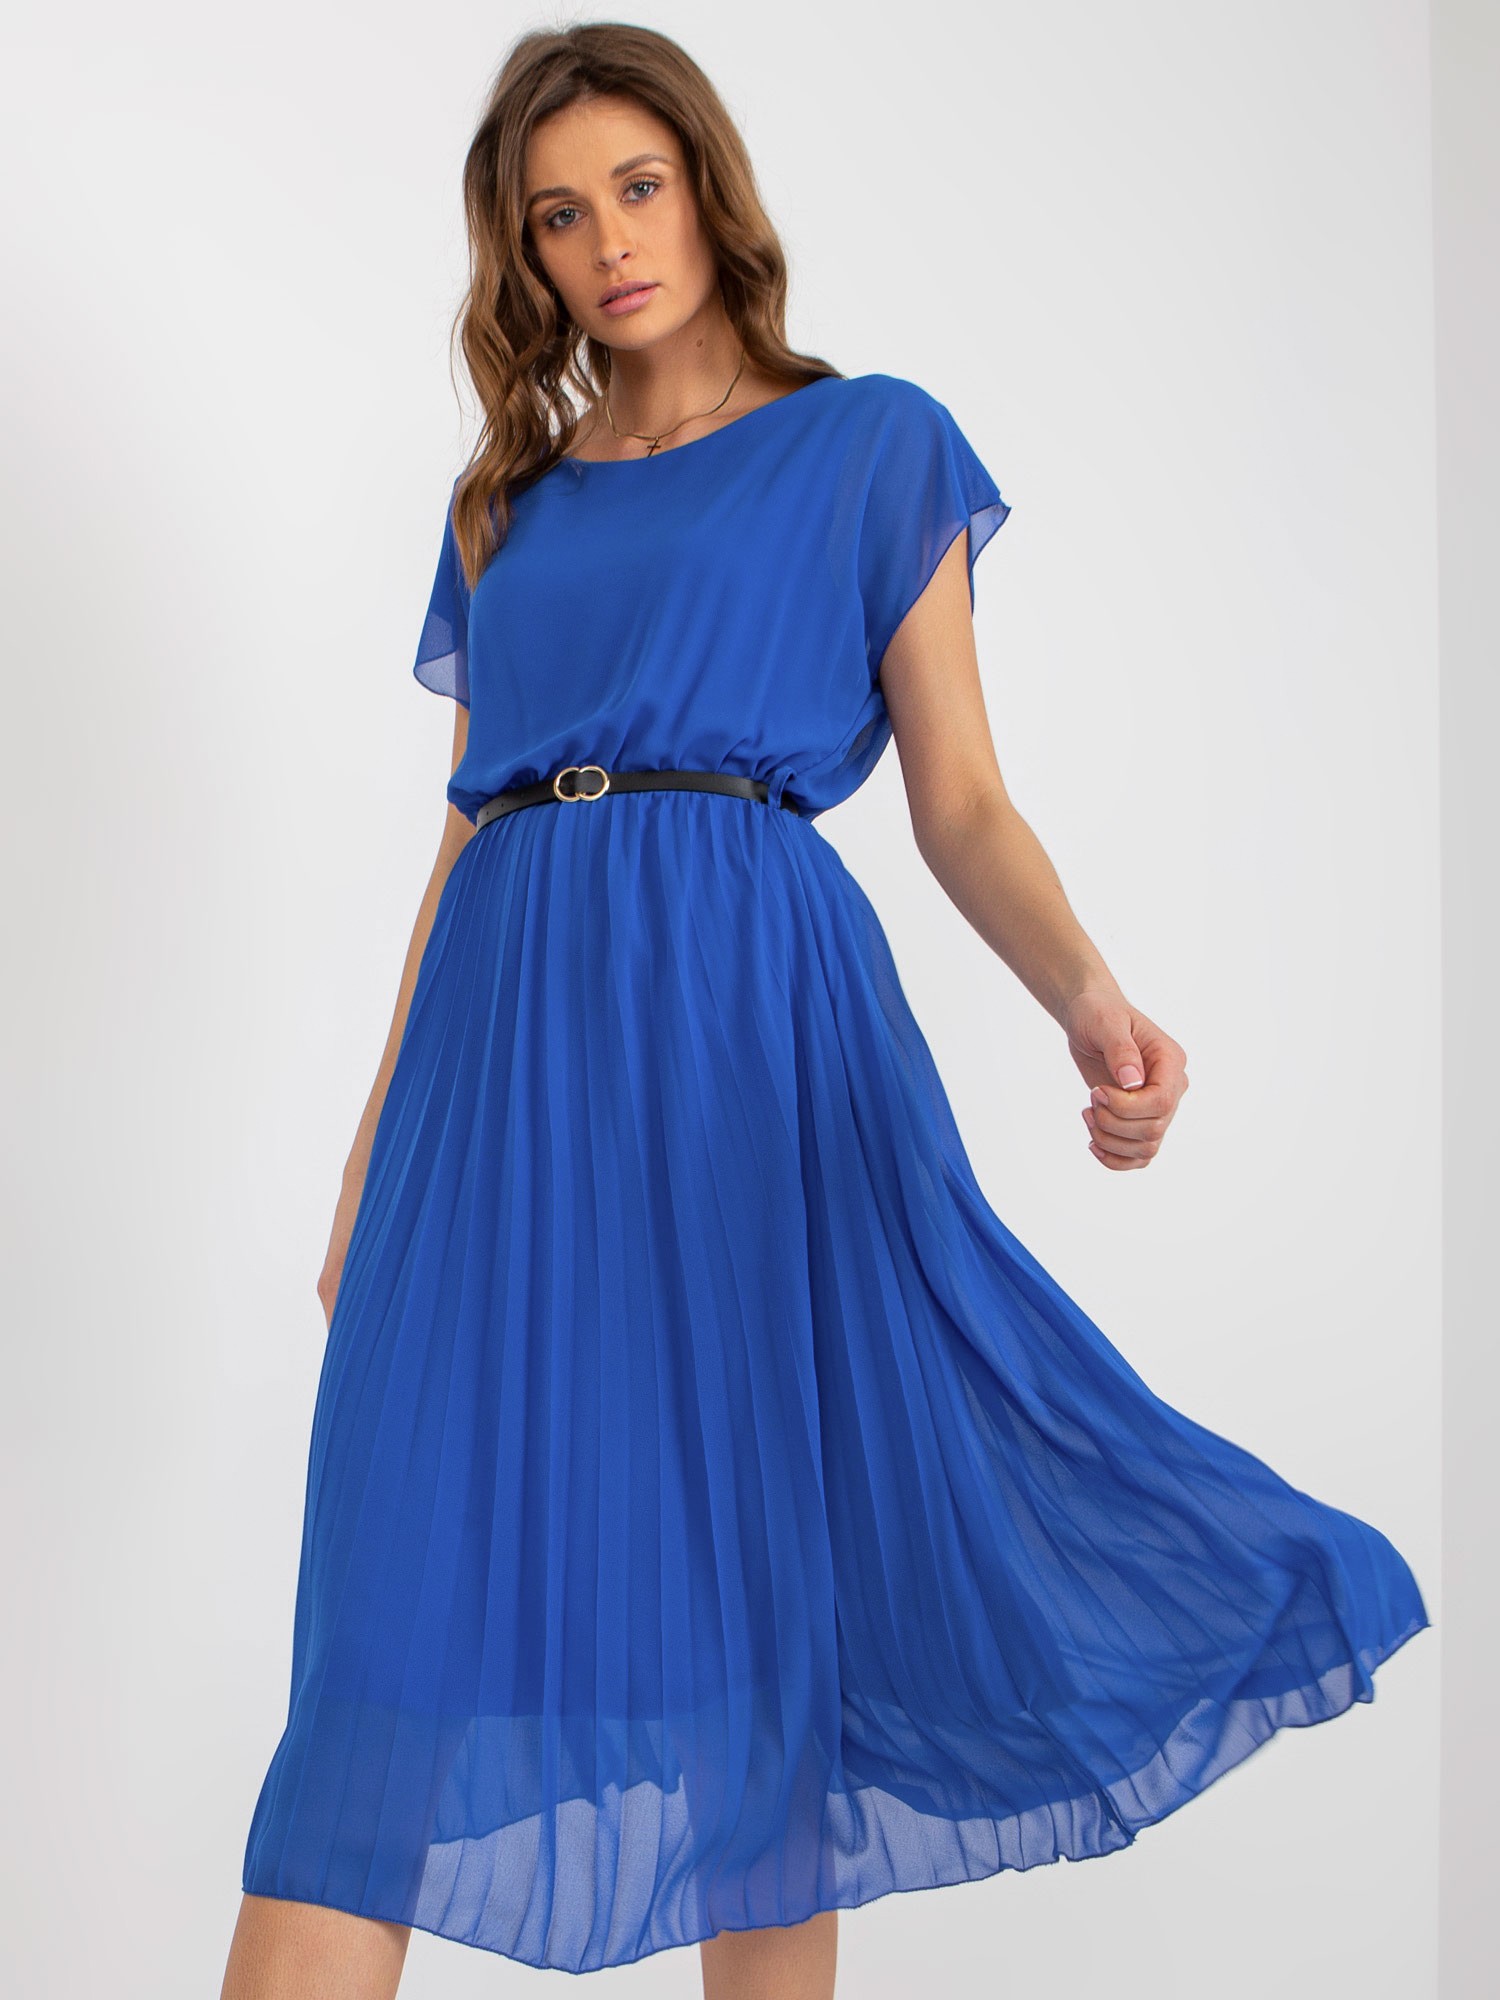 Cobalt blue pleated dress with the addition of viscose